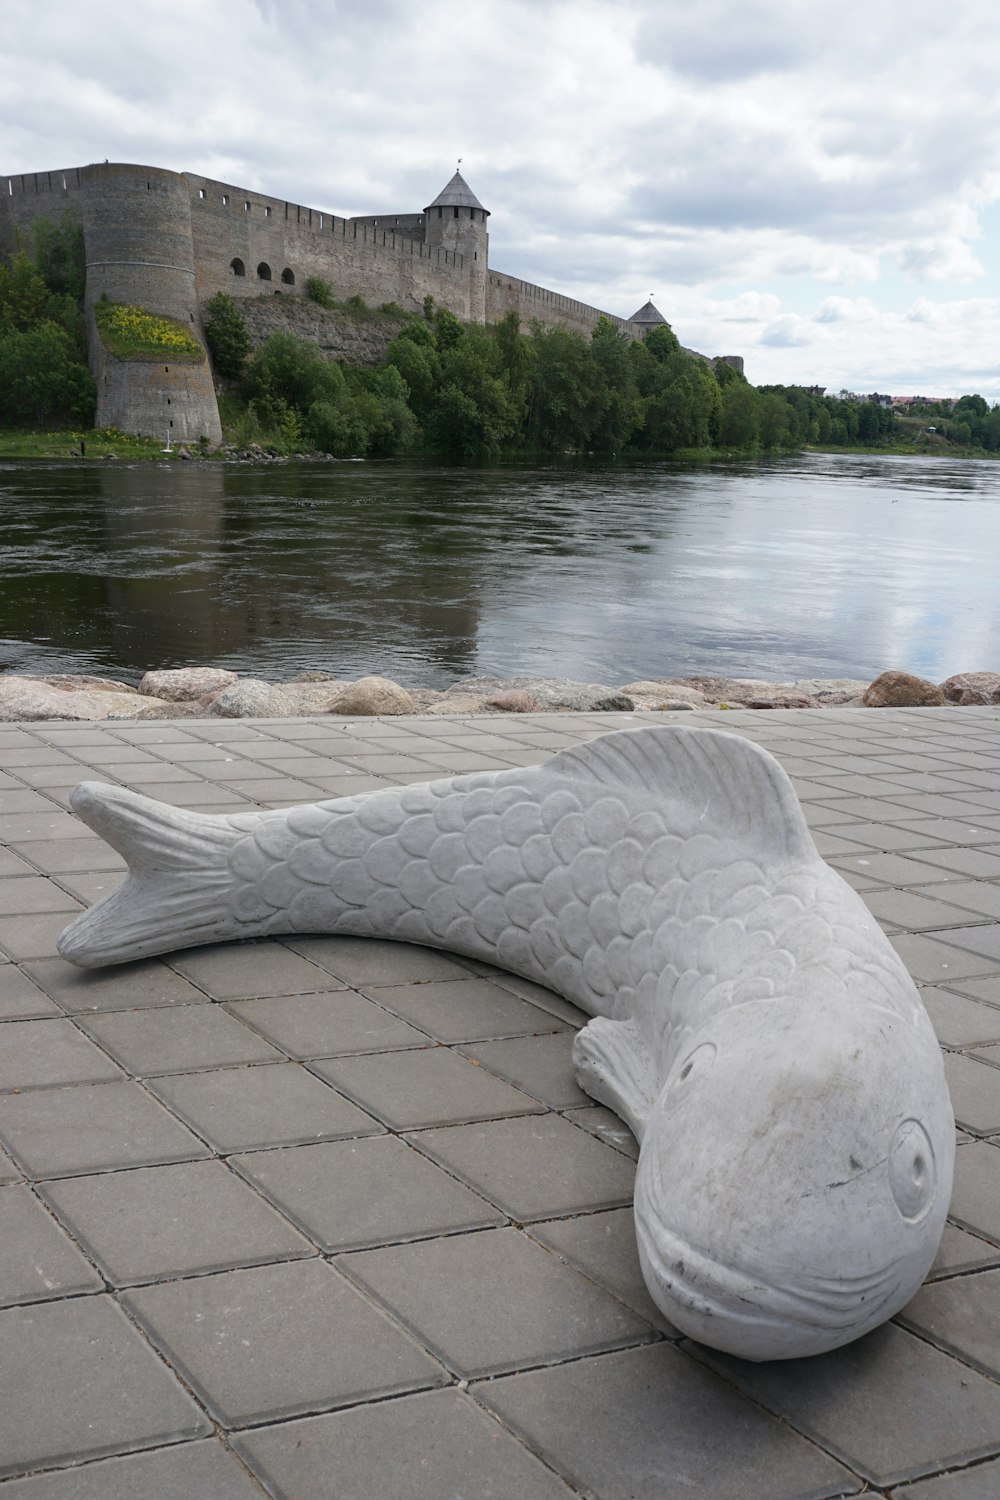 a statue of a fish laying on the ground